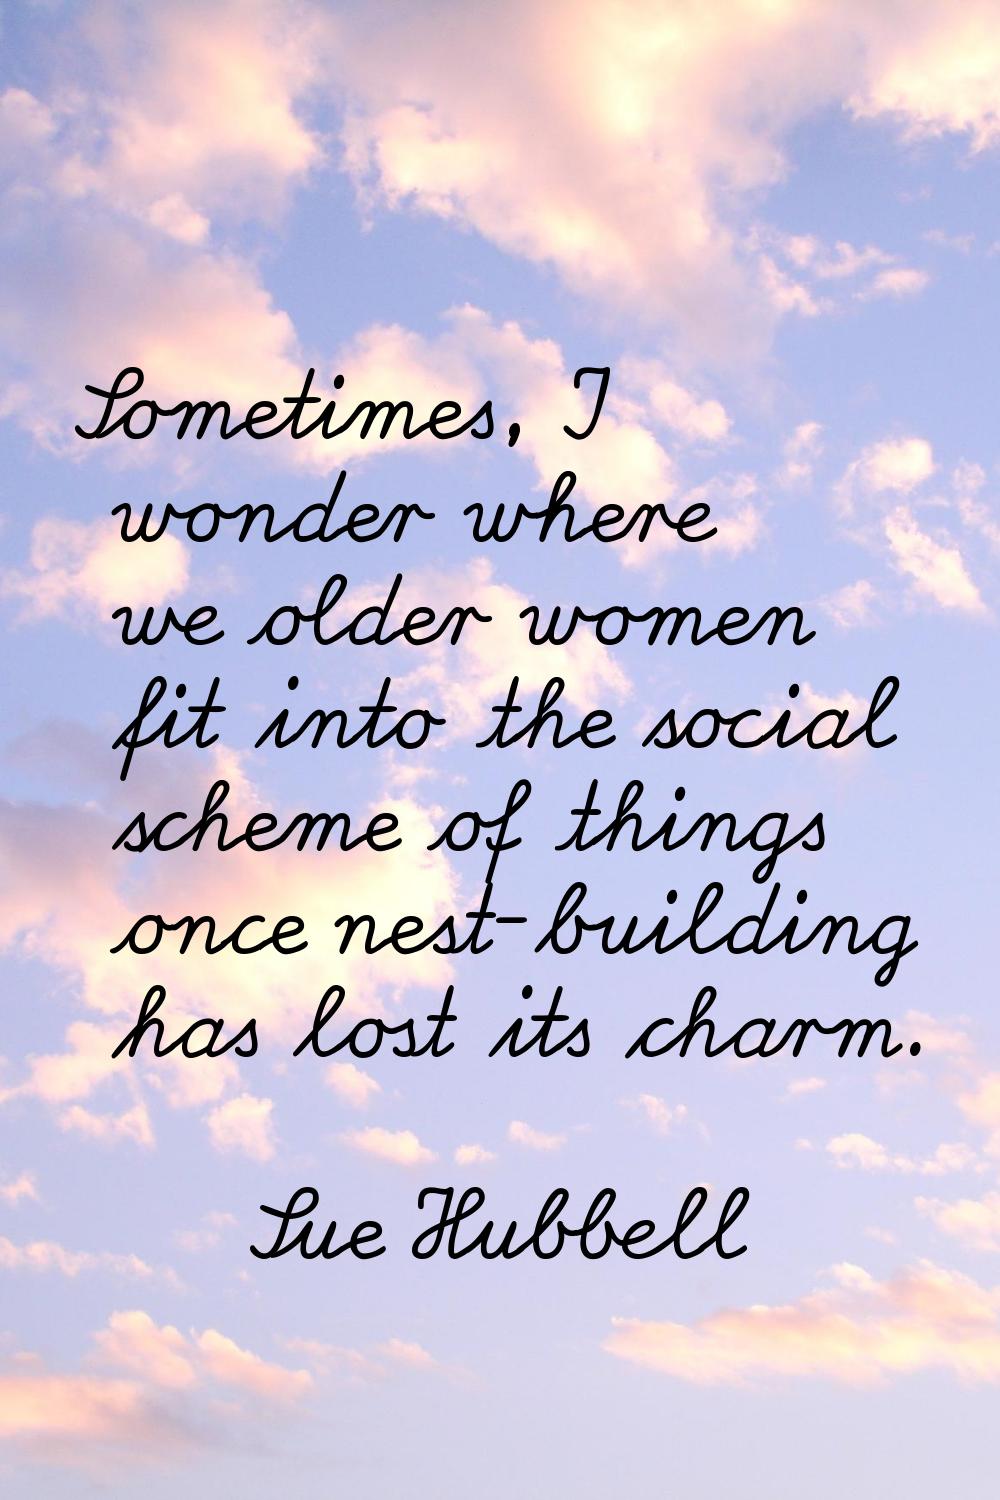 Sometimes, I wonder where we older women fit into the social scheme of things once nest-building ha